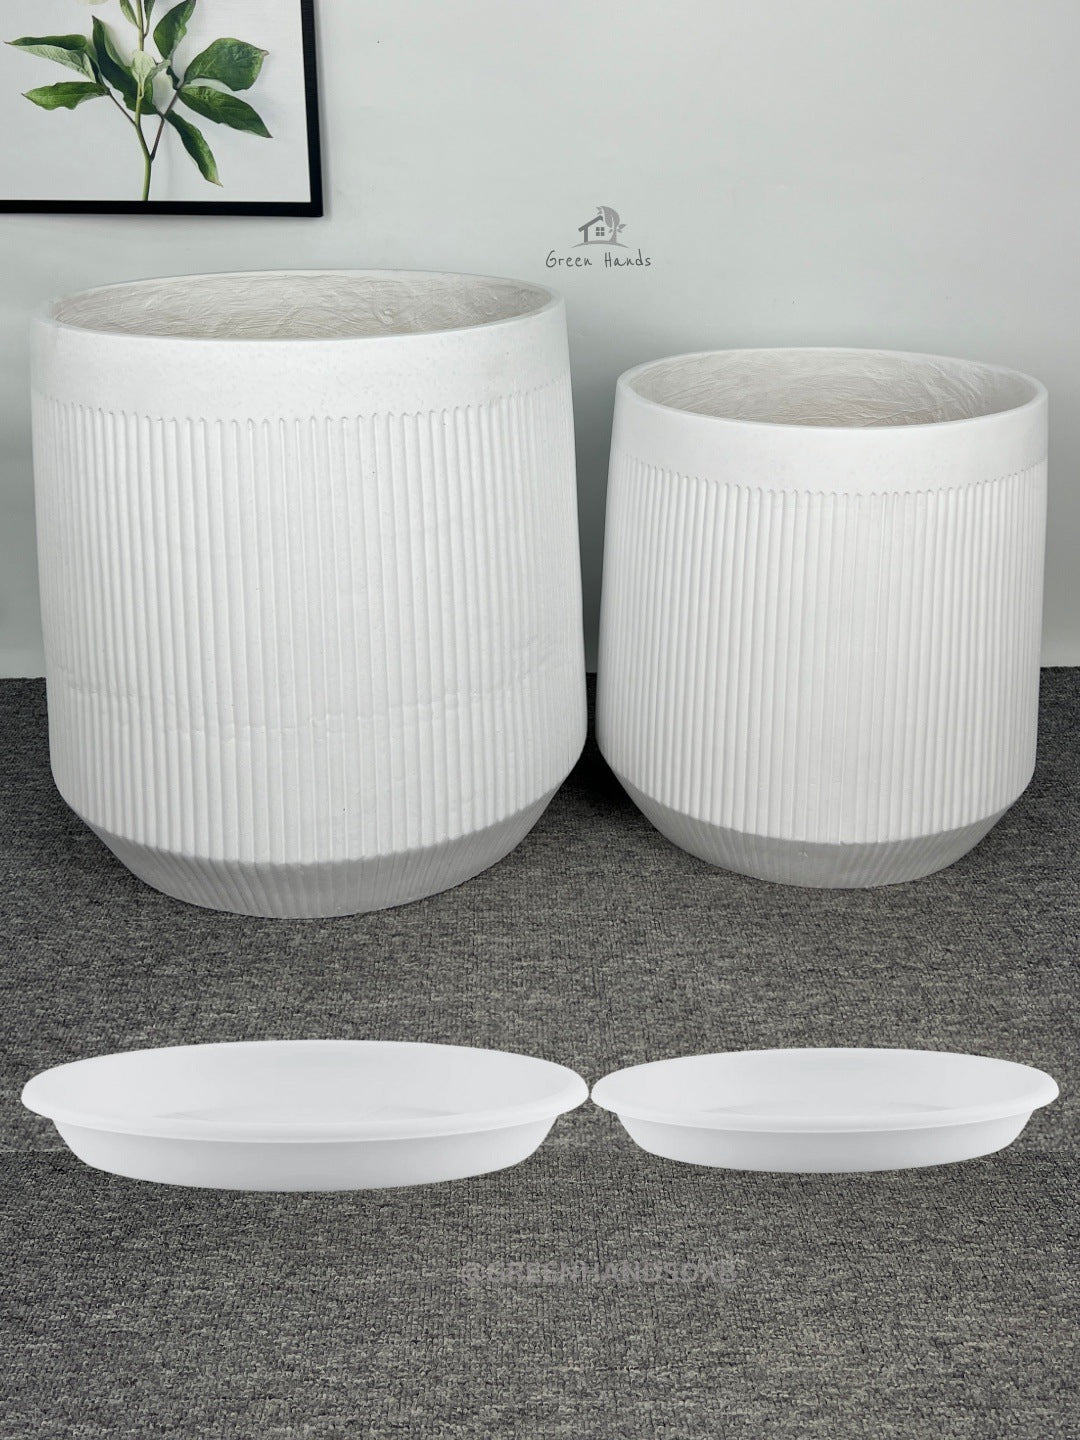 Elegant Ribbed Ficonstone Snow White Flower Pot with Drain Holes & Base Plate - Elevate Your Decor with a Touch of Elegance